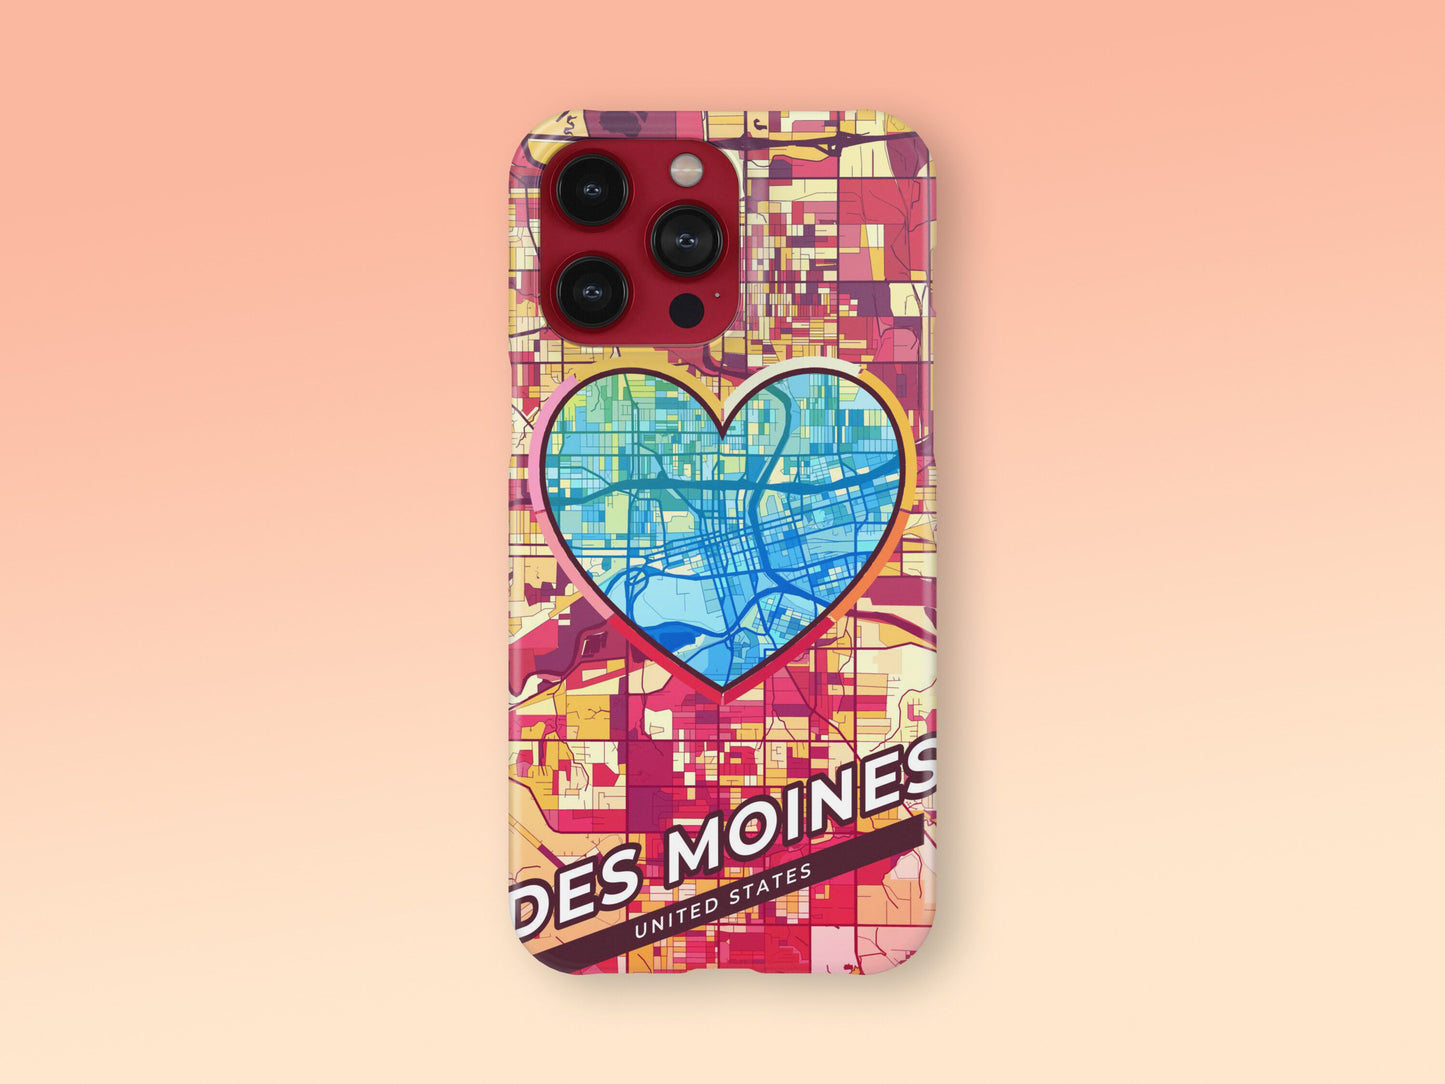 Des Moines Iowa slim phone case with colorful icon. Birthday, wedding or housewarming gift. Couple match cases. 2